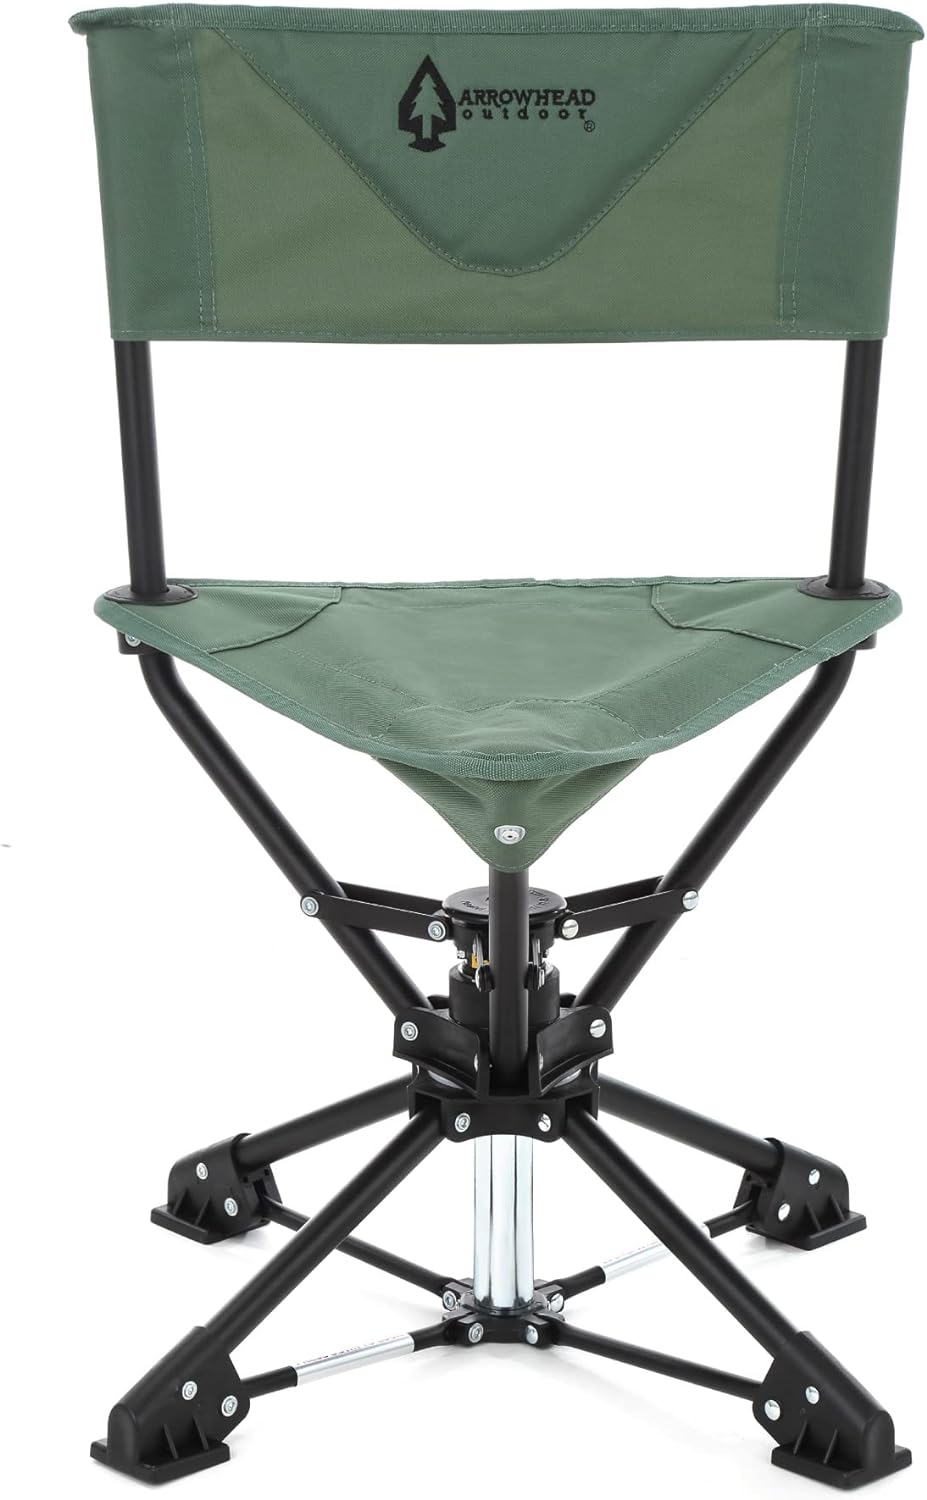 Arrowhead Outdoor 360 Degree Swivel Hunting Chair Stool Seat, Perfect for Blinds, No Sink Feet, Supports Up to 450lbs, Carrying Case, Steel Frame.